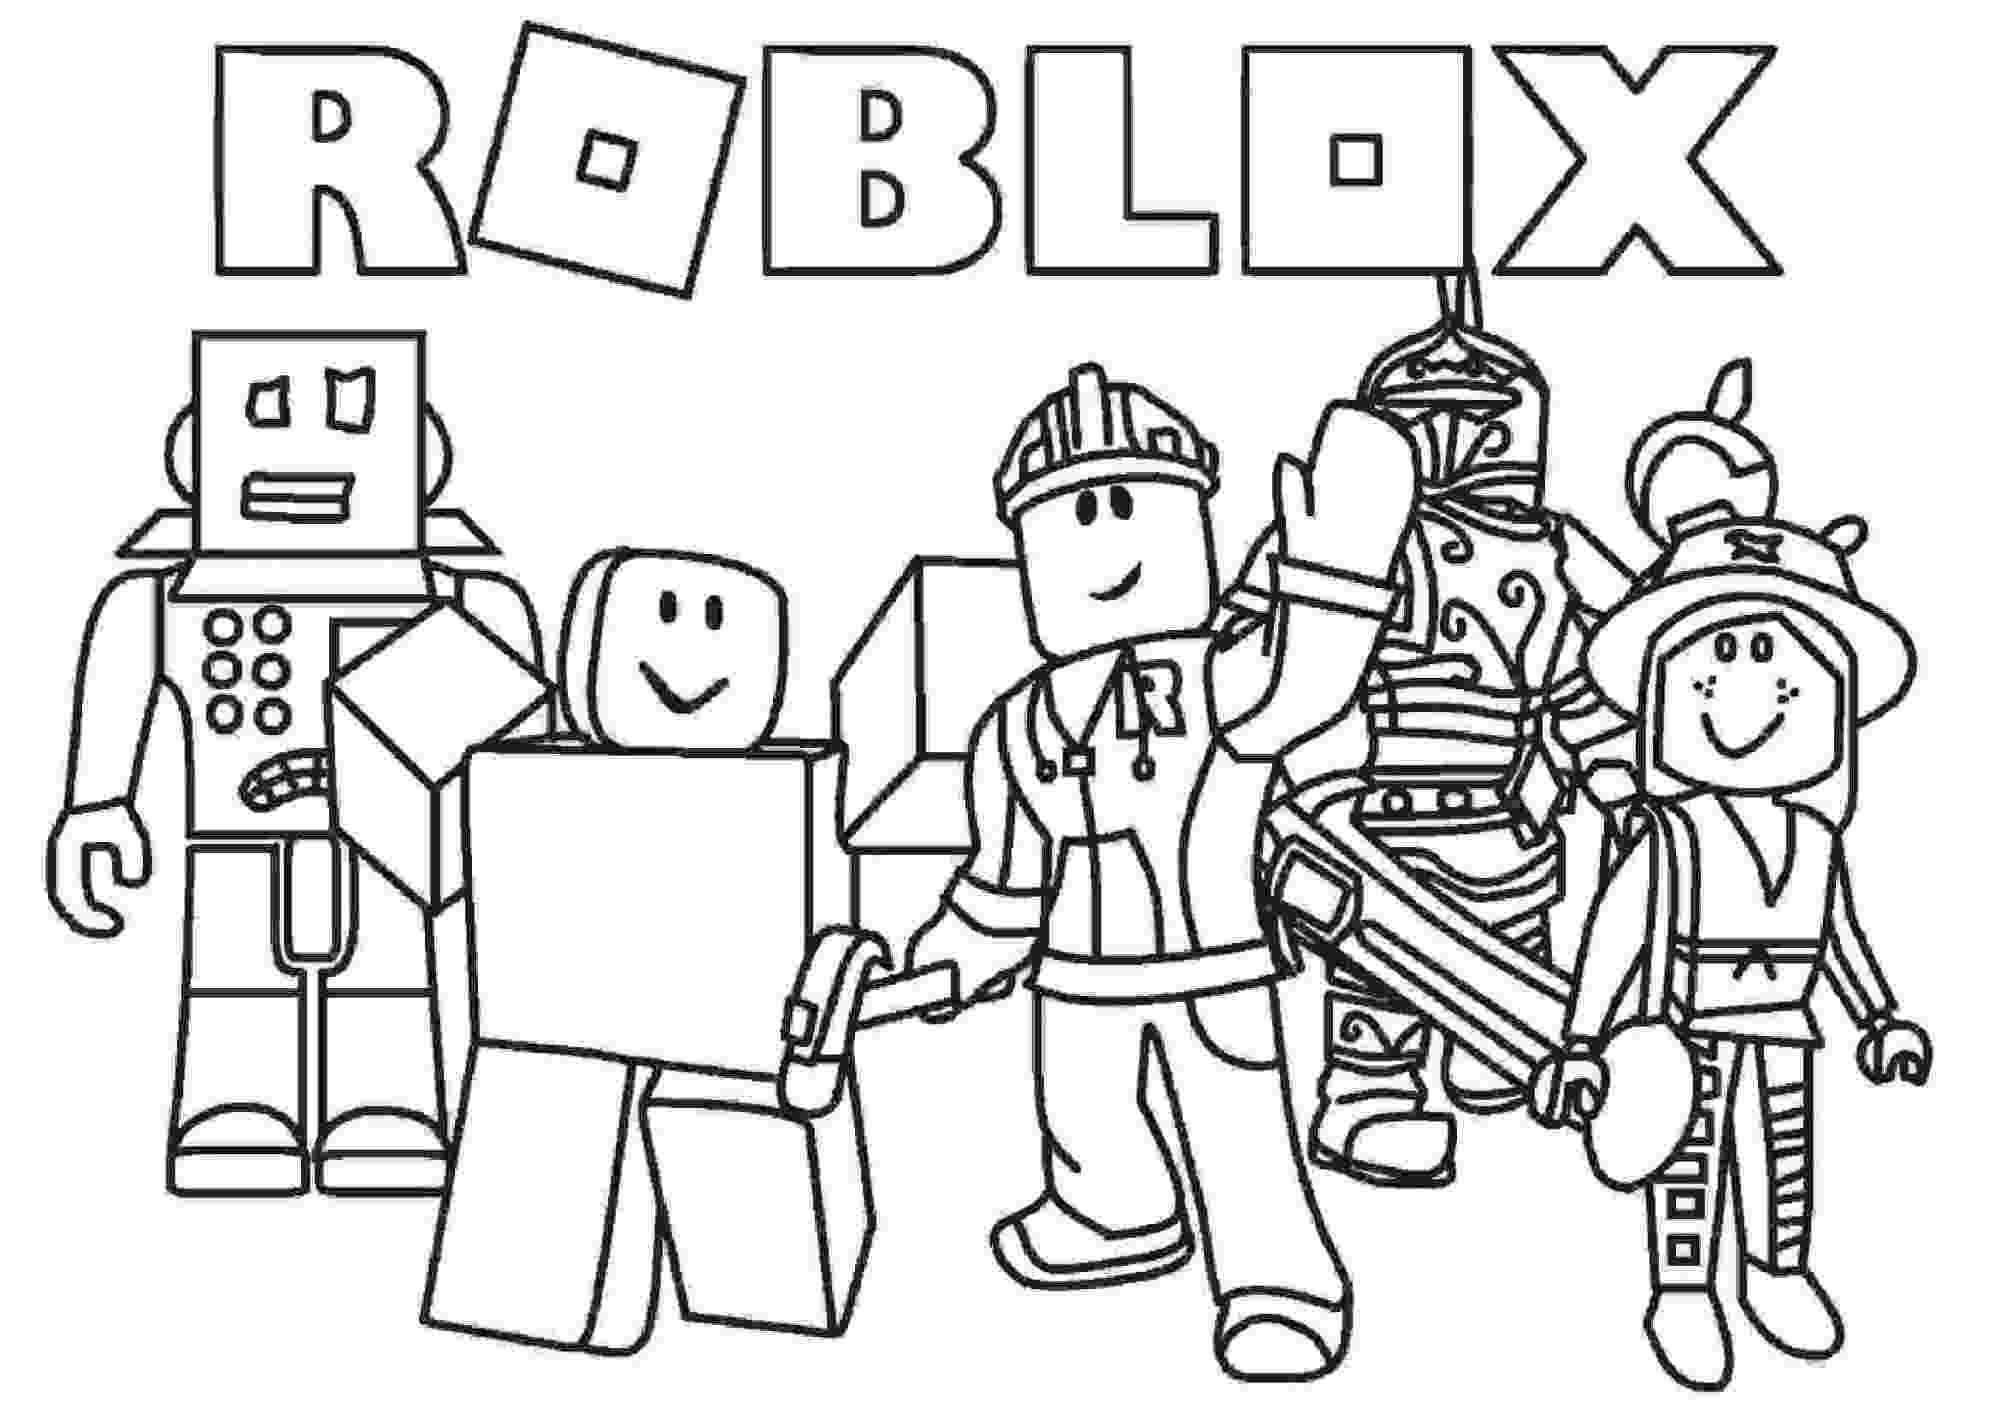 Roblox Team Protects The Earth